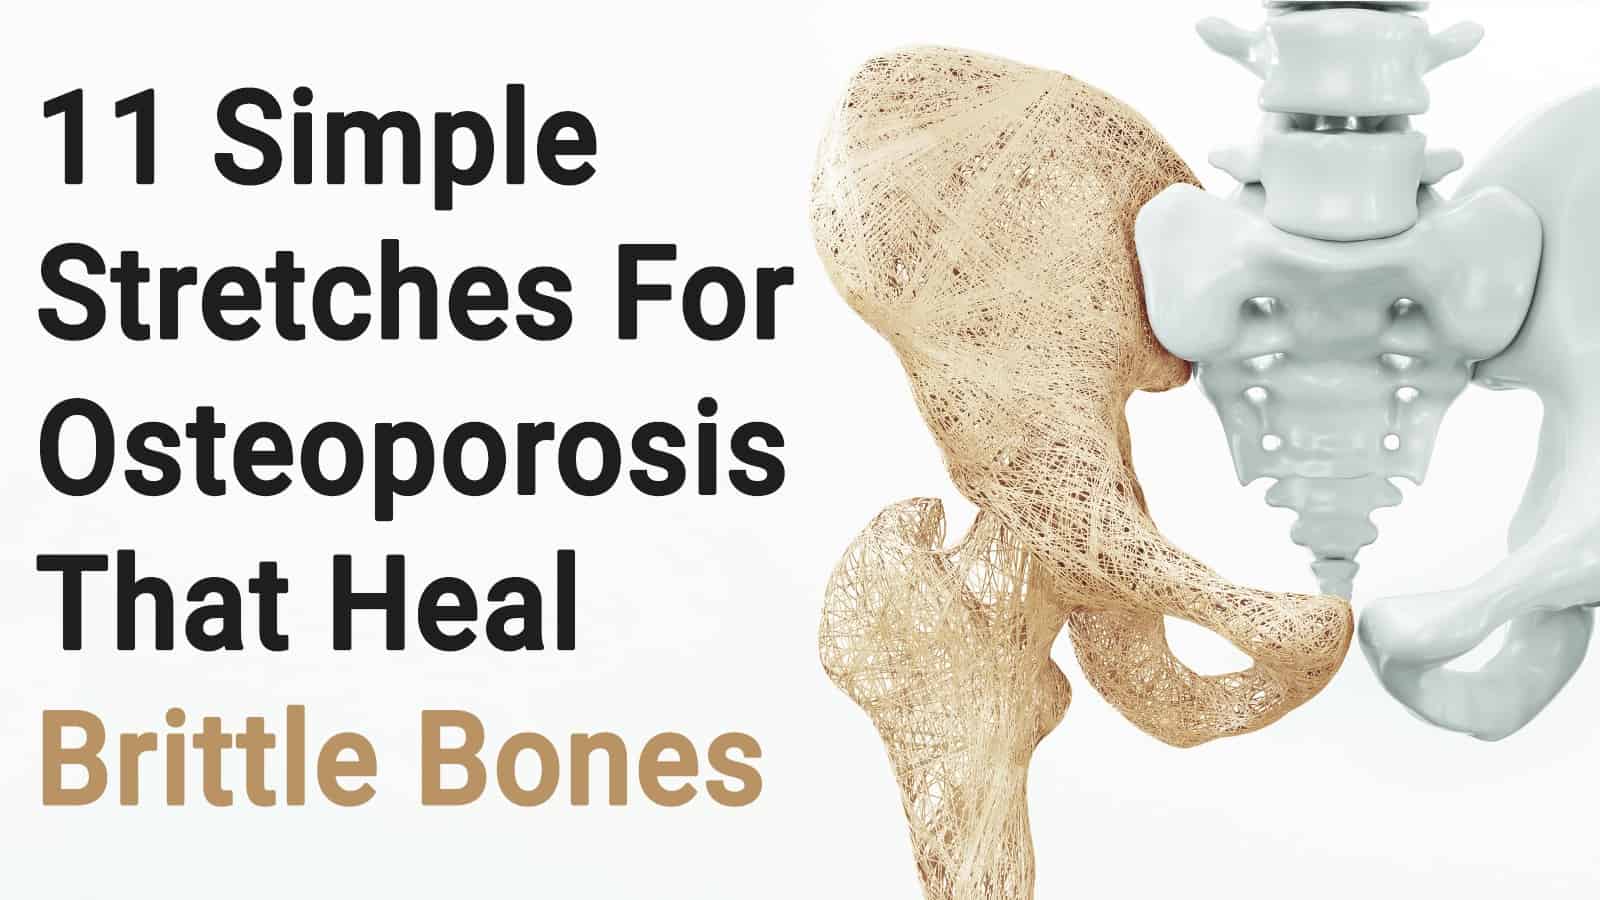 11 Simple Stretches For Osteoporosis That Heal Brittle Bones